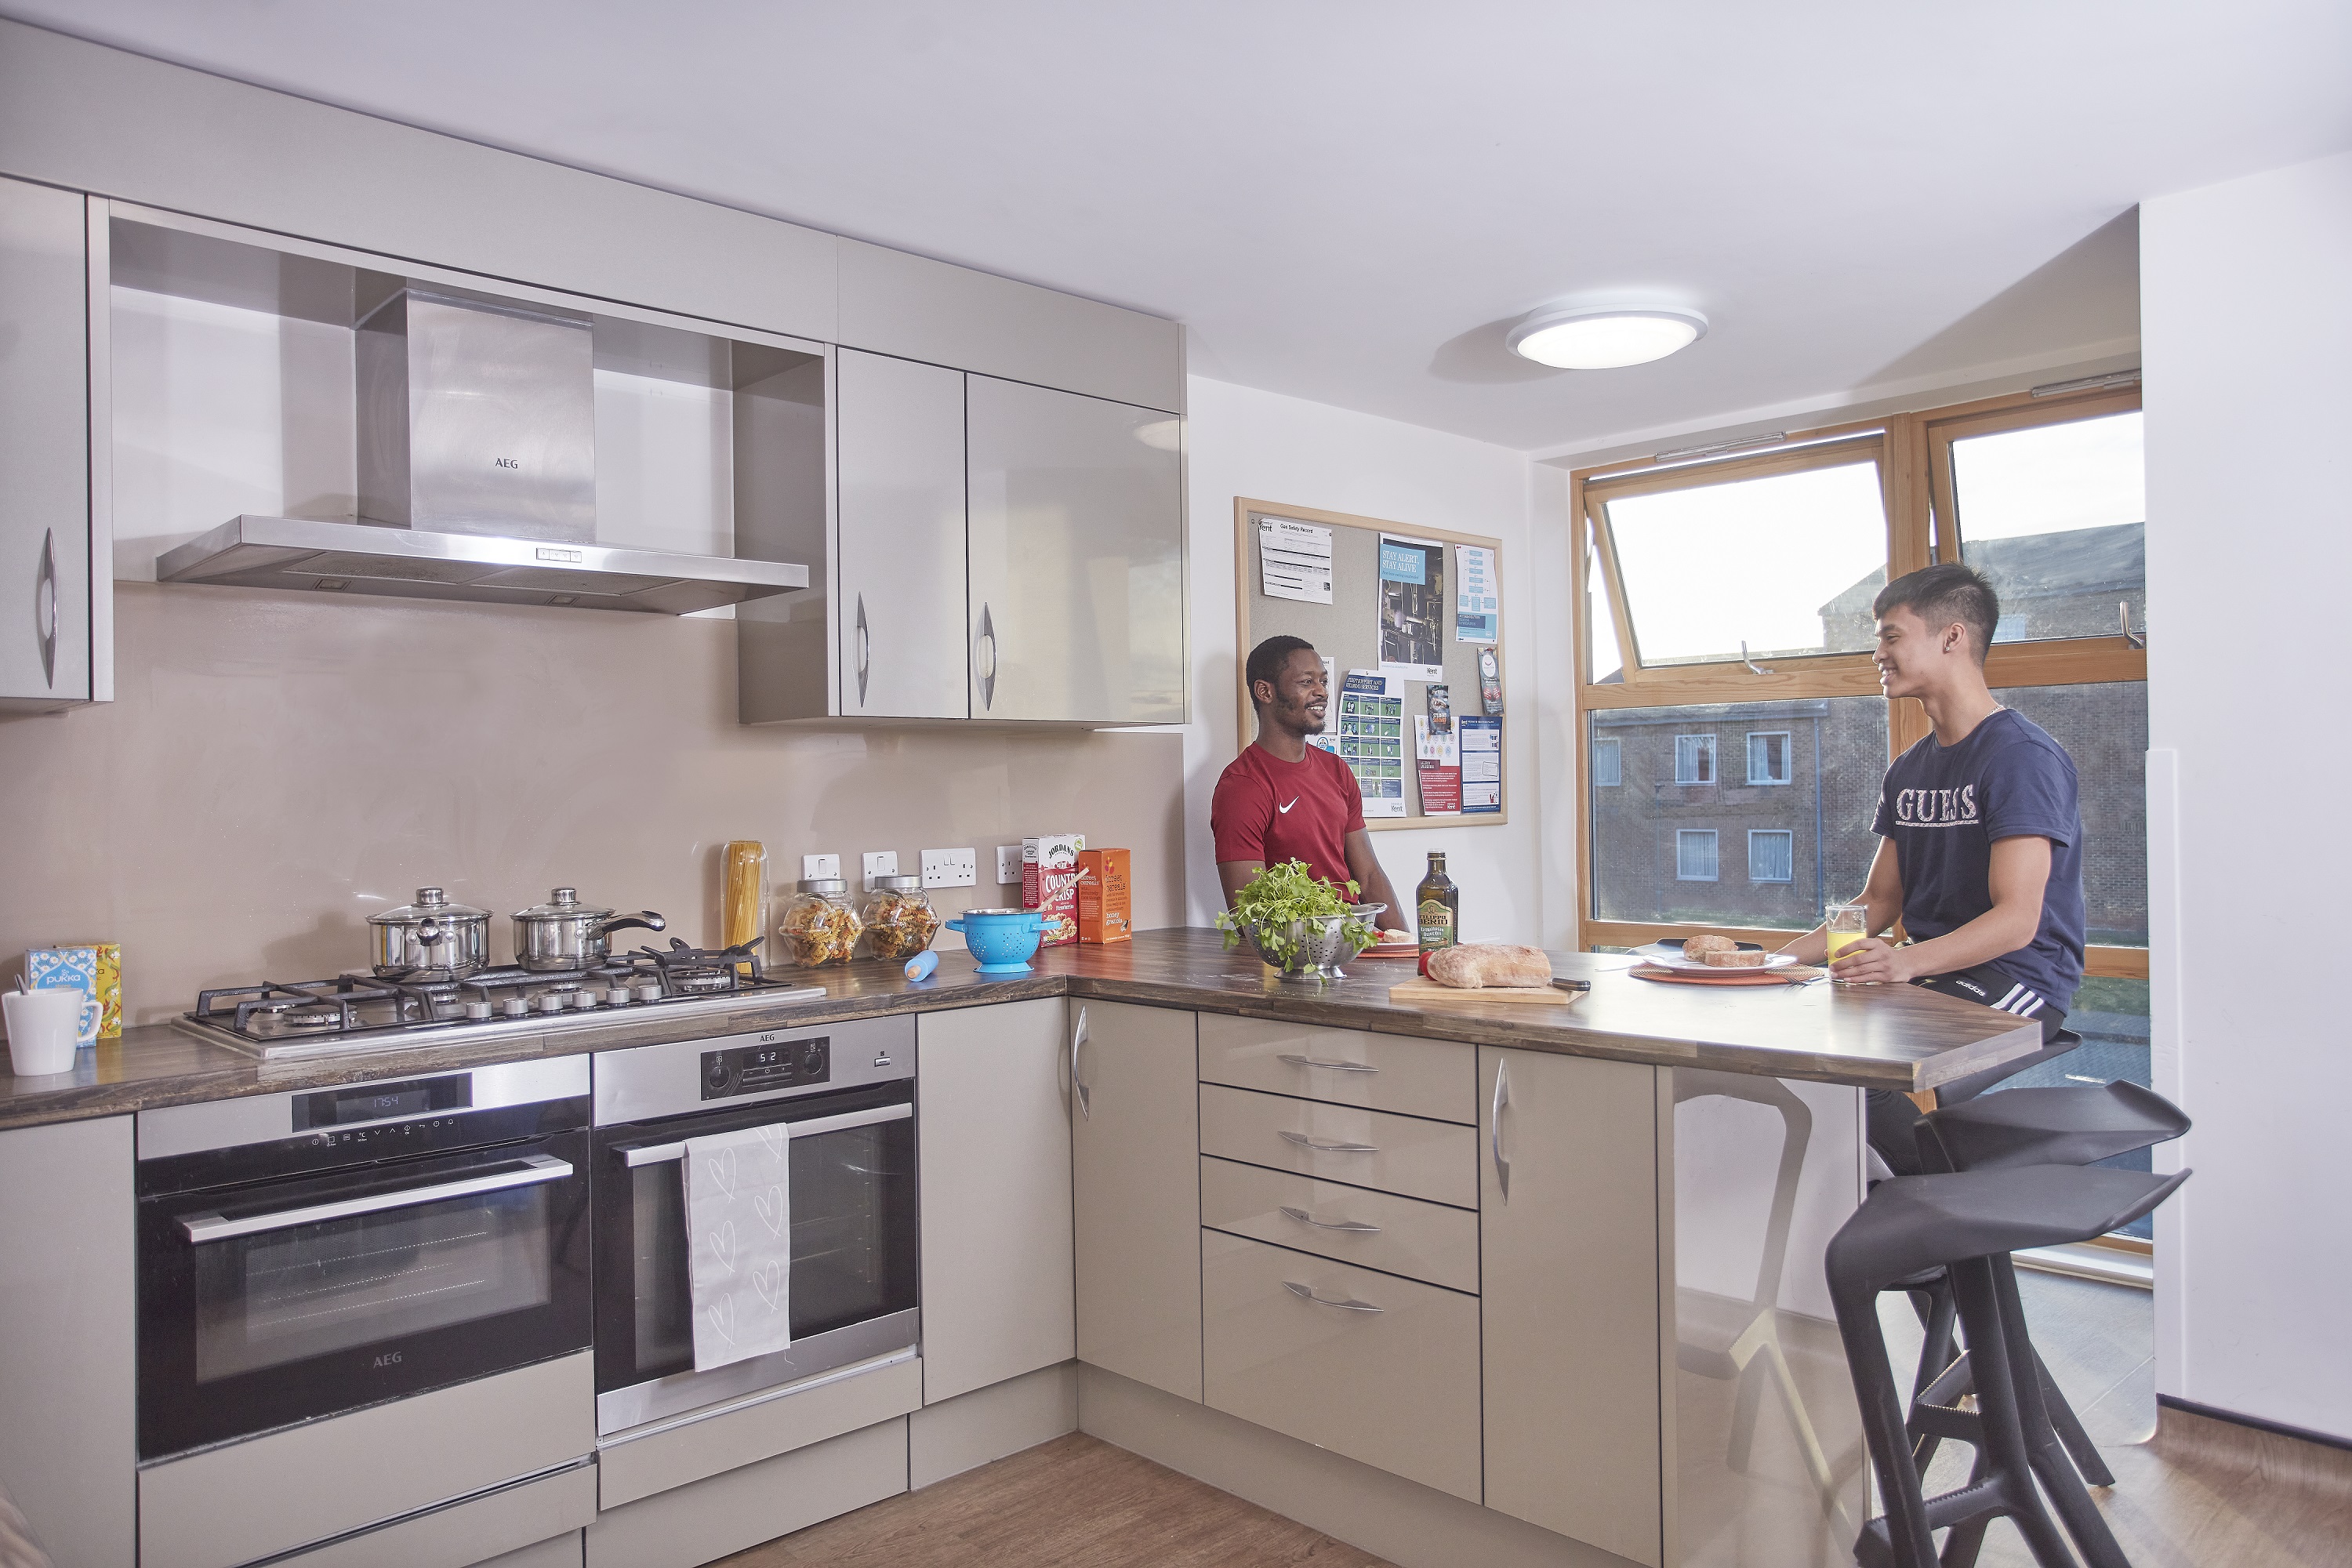 Park Wood Flat kitchen with two students talking